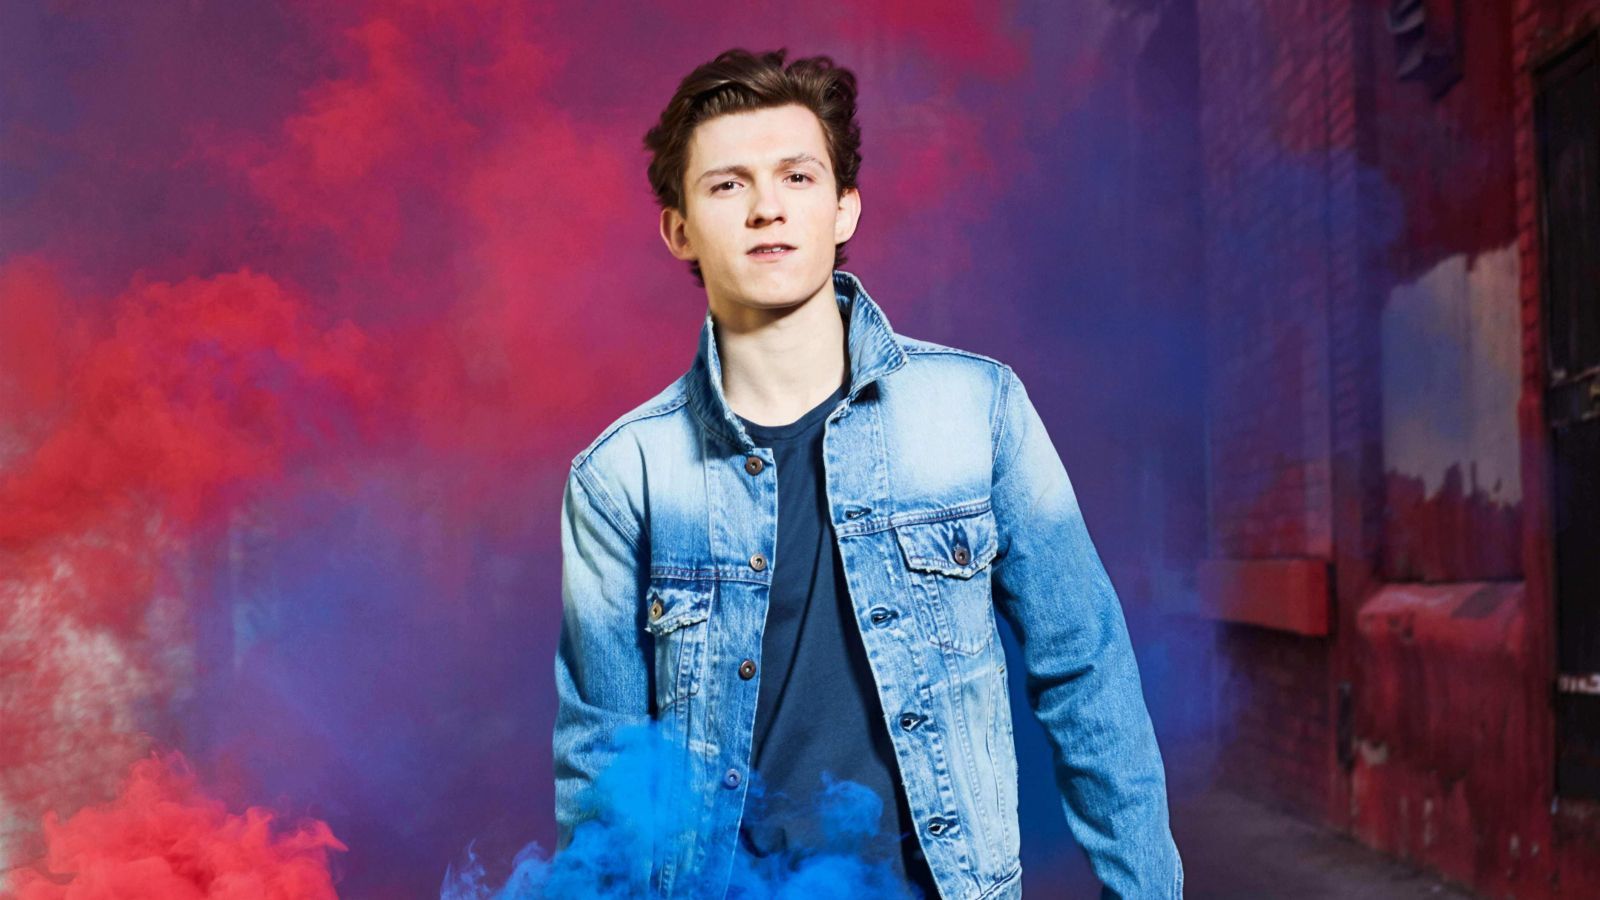 Download wallpaper 1600x900 tom holland, actor, celebrity, 16:9 widescreen 1600x900 HD background, 7316